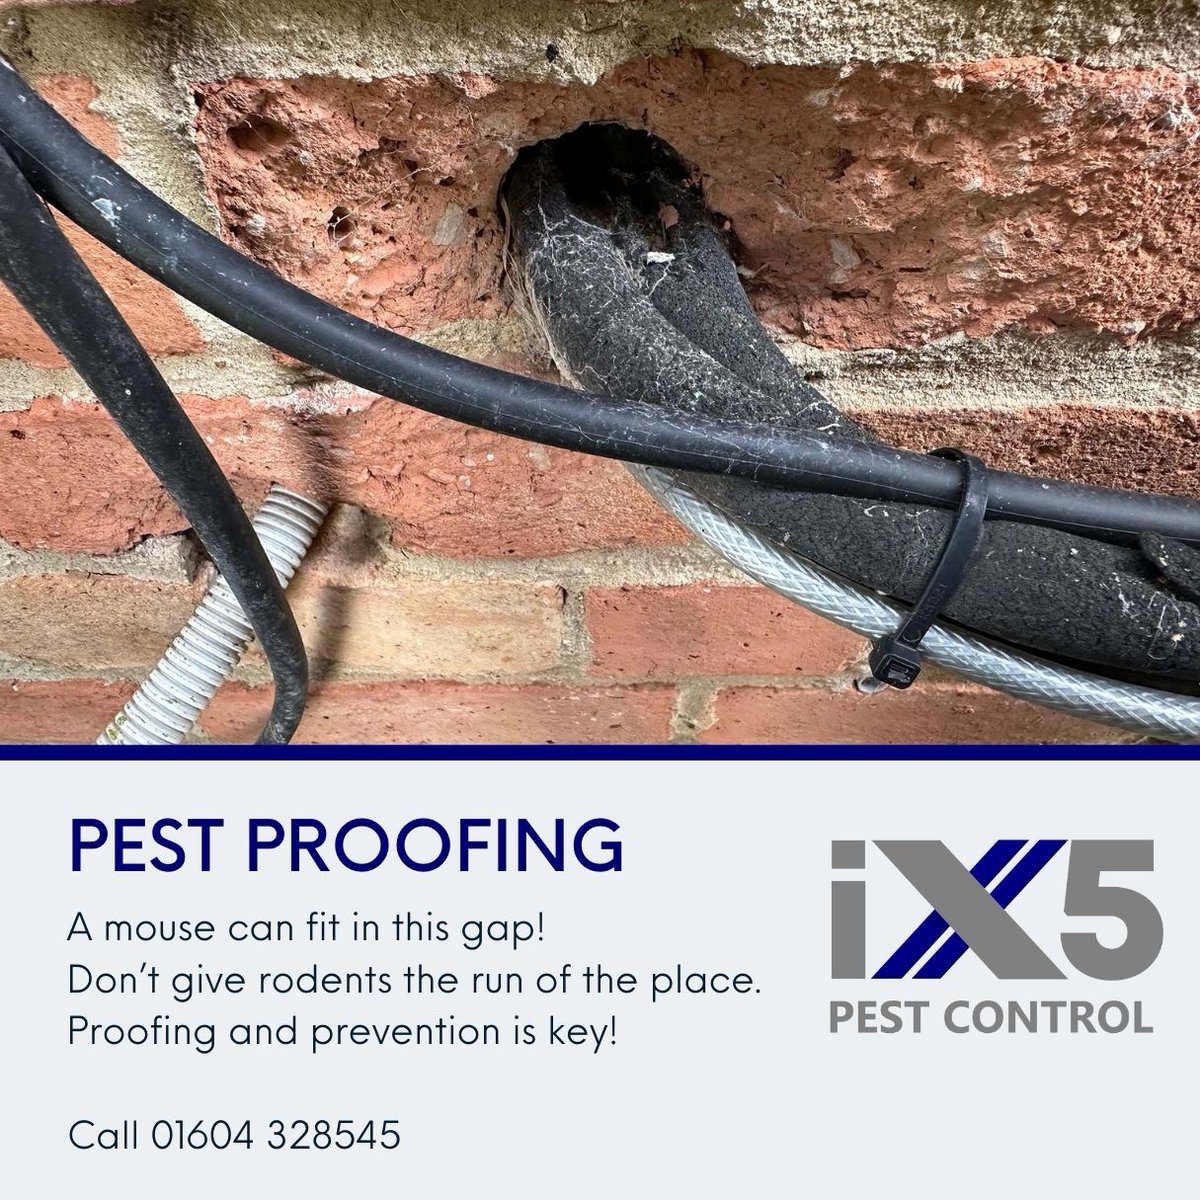 Reminder! 🏠Ensure your home or office is safe and secure from pests. Our latest blog offers practical advice on fortifying your property against rodents. Check it out now! #PestManagement #Pestproofing ix5.uk/effective-pest…